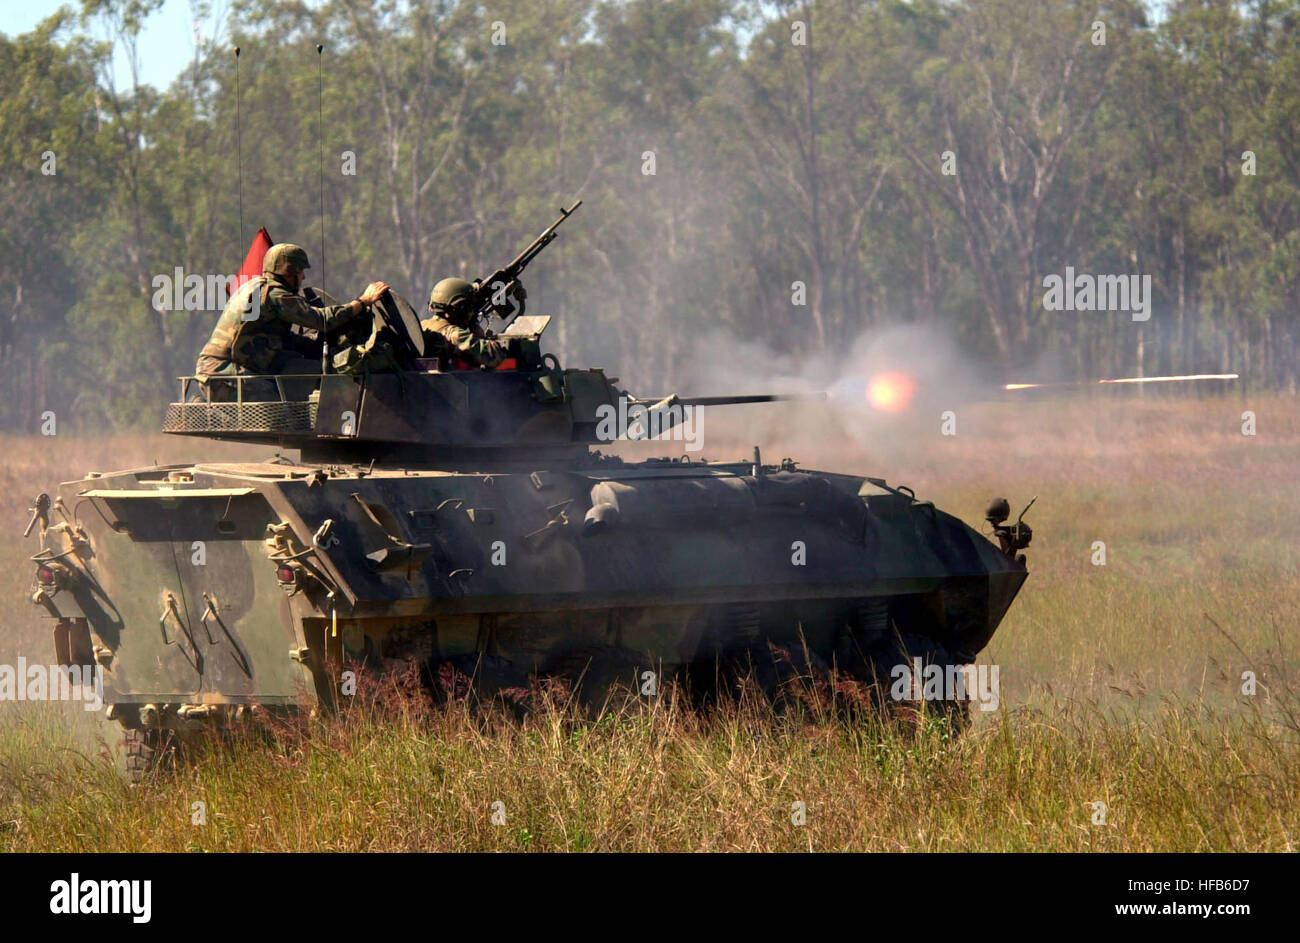 010525-N-9818S-005 Marines commence a live fire with a Light Armored Vehicle for Exercise Tandem Thrust 2001 at Schoalwater Bay Training Area, Queensland, Australia, on May 25, 2001.  Tandem Thrust is a combined military training exercise involving more than 18,000 U.S., Australian, and Canadian personnel who are training in crisis action planning and execution of contingency response operations.  These Marines are part of the 4th Light Armored Reconnaissance Battalion, deployed from Quantico, Va..  DoD photo by Petty Officer 3rd Class Jennifer A. Smith, U.S. Navy.  (Released) Defense.gov News Stock Photo